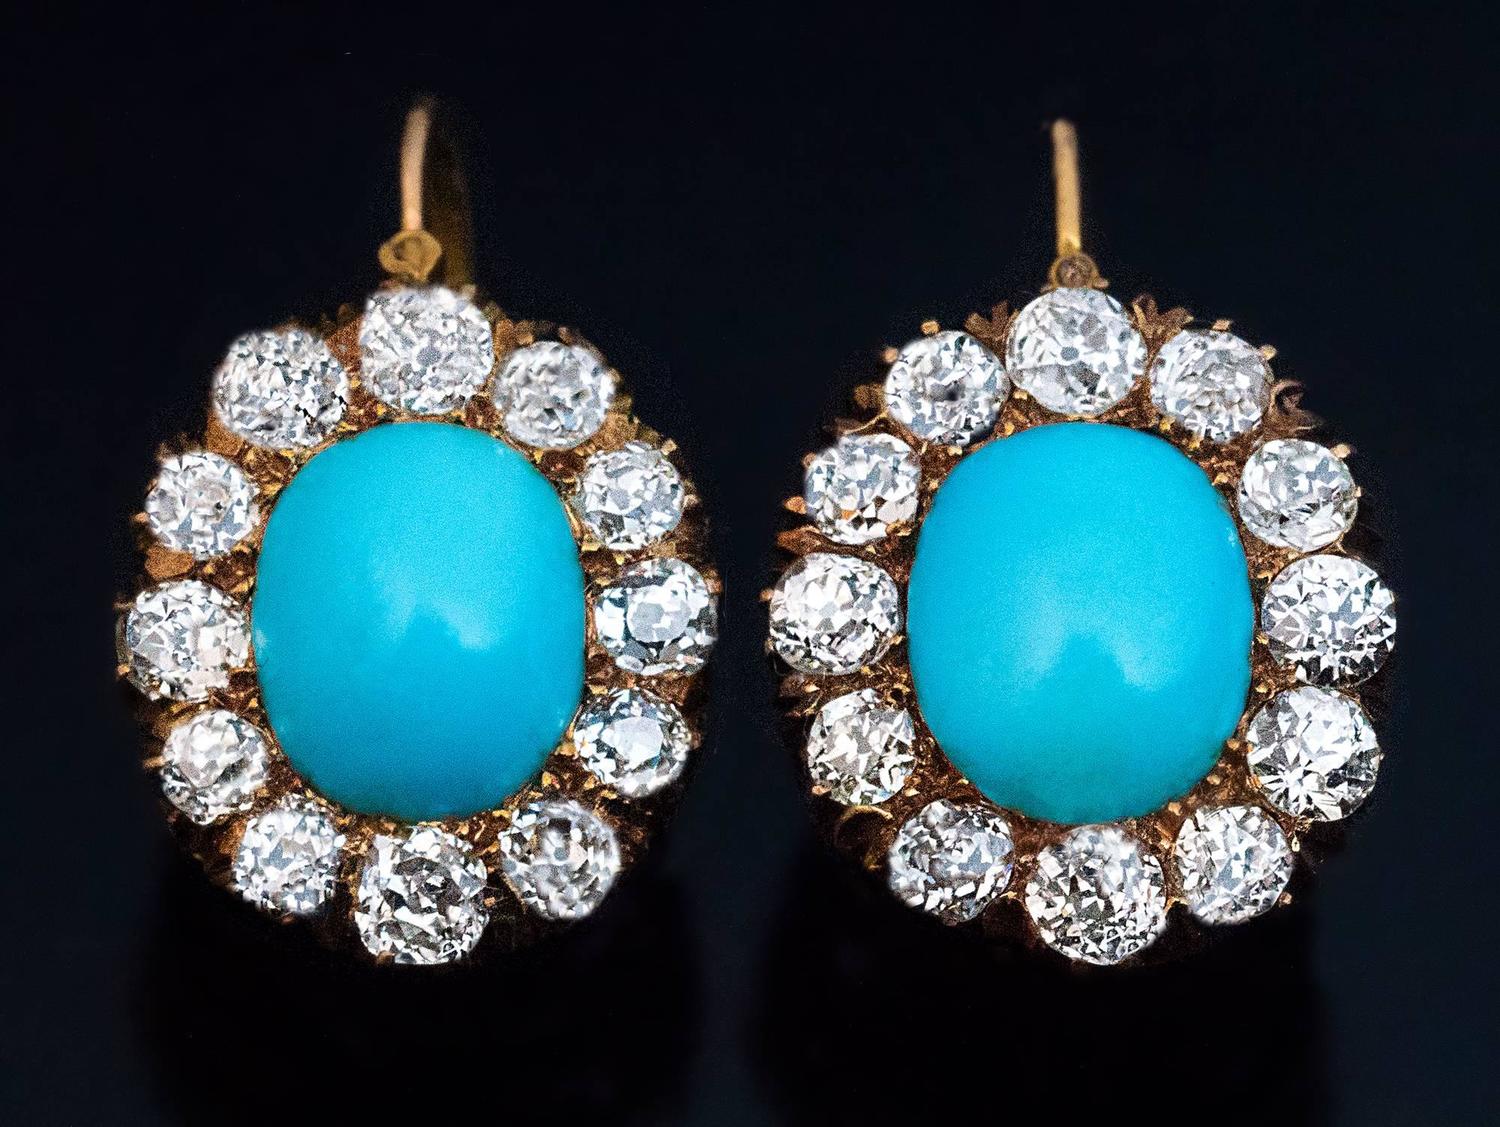 Antique Turquoise Diamond Gold Earrings At 1stdibs